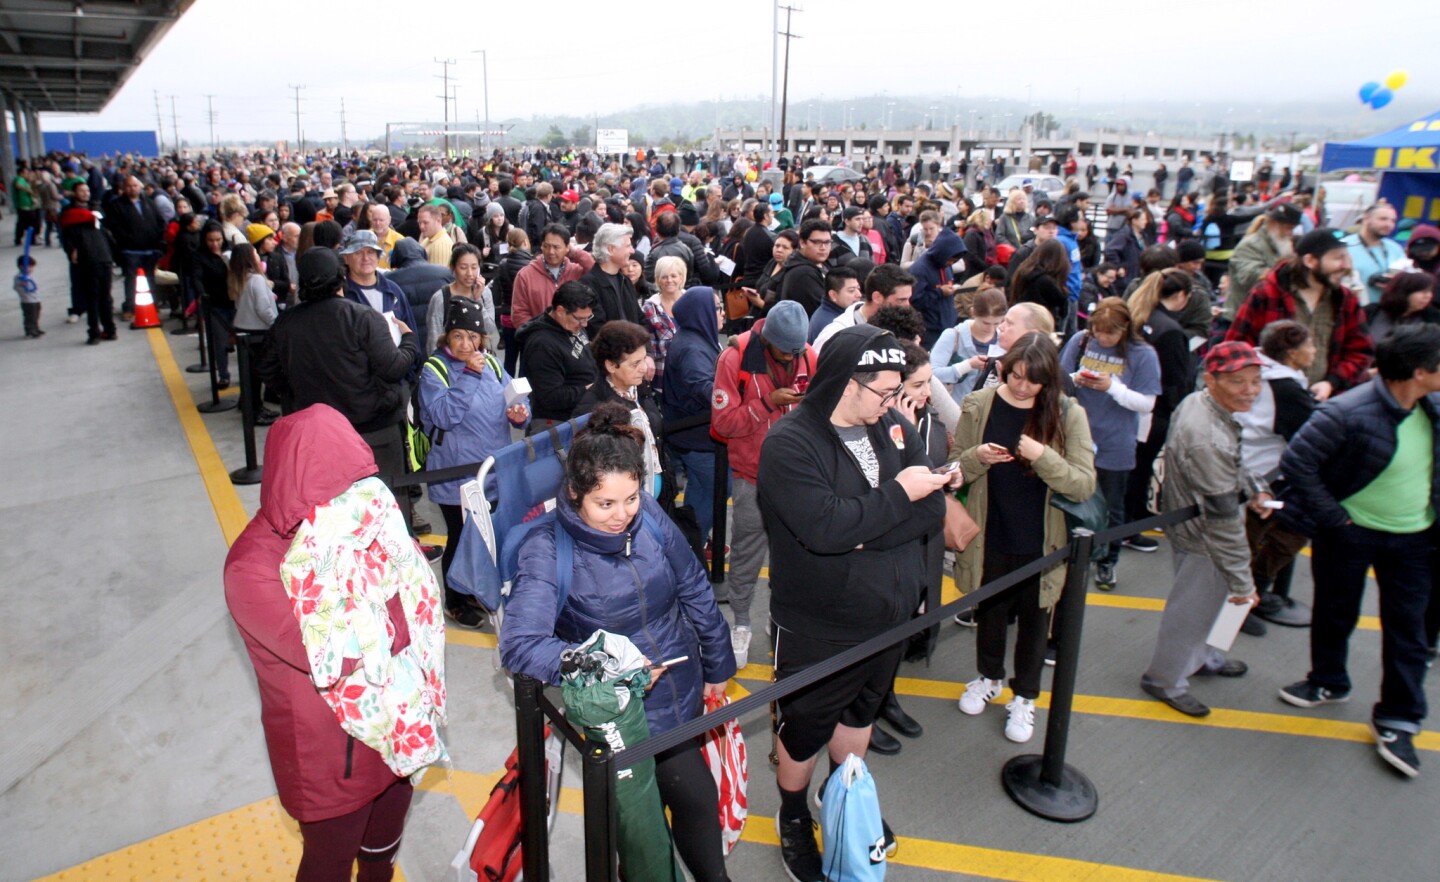 Hundreds wait in line for the grand opening of the new Ikea in Burbank on Wednesday, Feb. 8, 2017. Located on San Fernando Road, the store is the largest one in North America with 1,700 parking posts and a restaurant that seats 600 people.